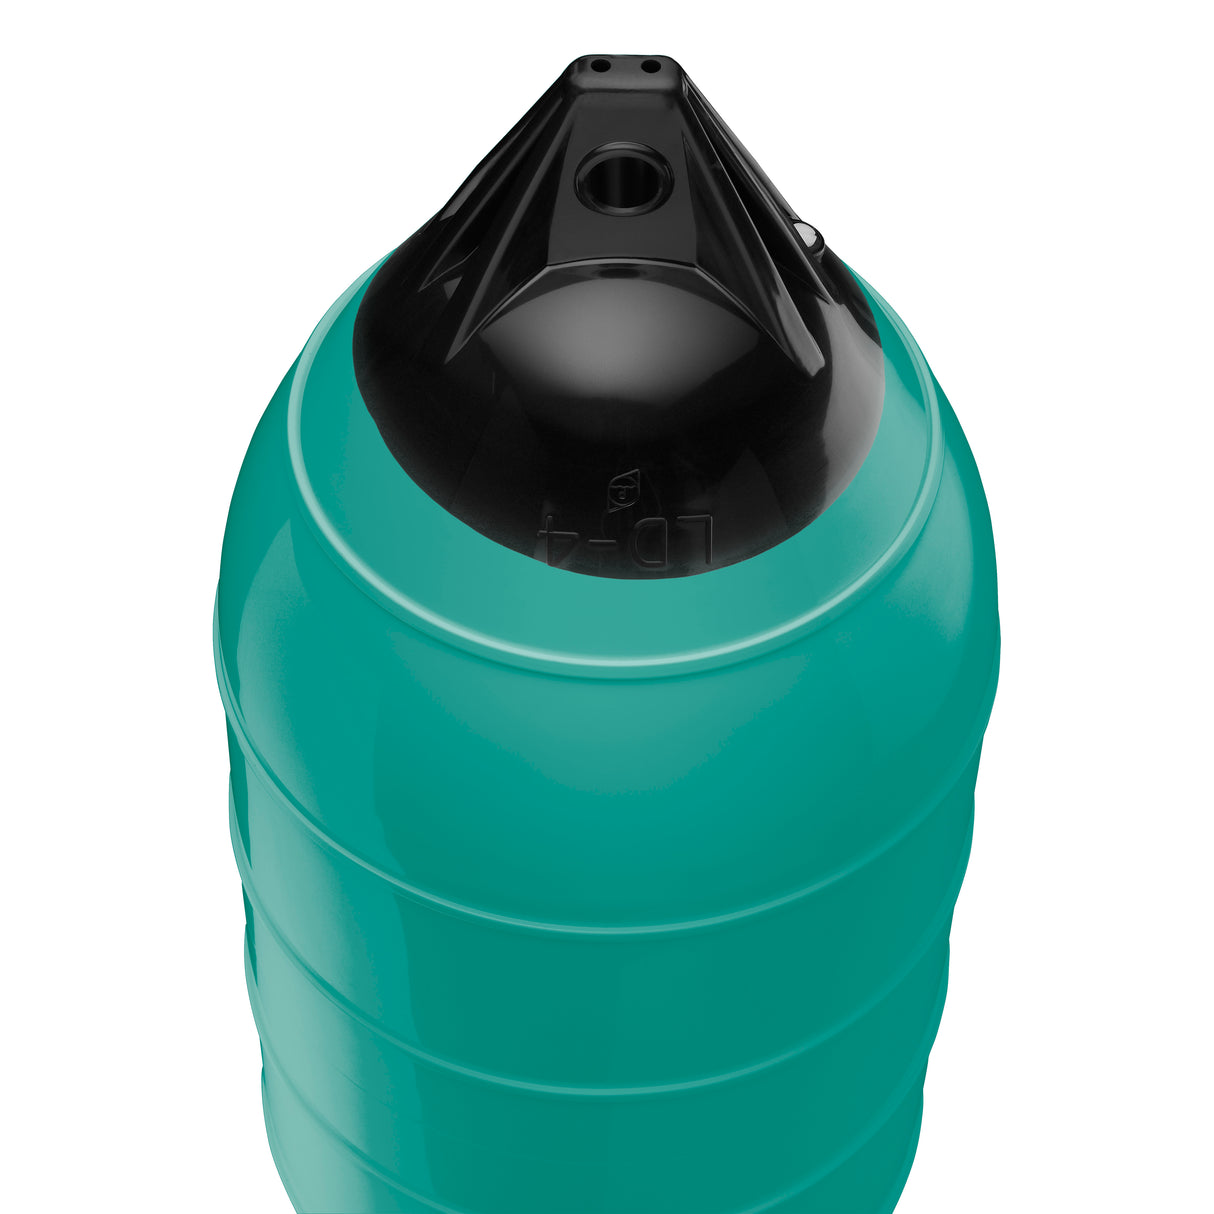 Teal low drag buoy with Black-Top, Polyform LD-4 angled shot